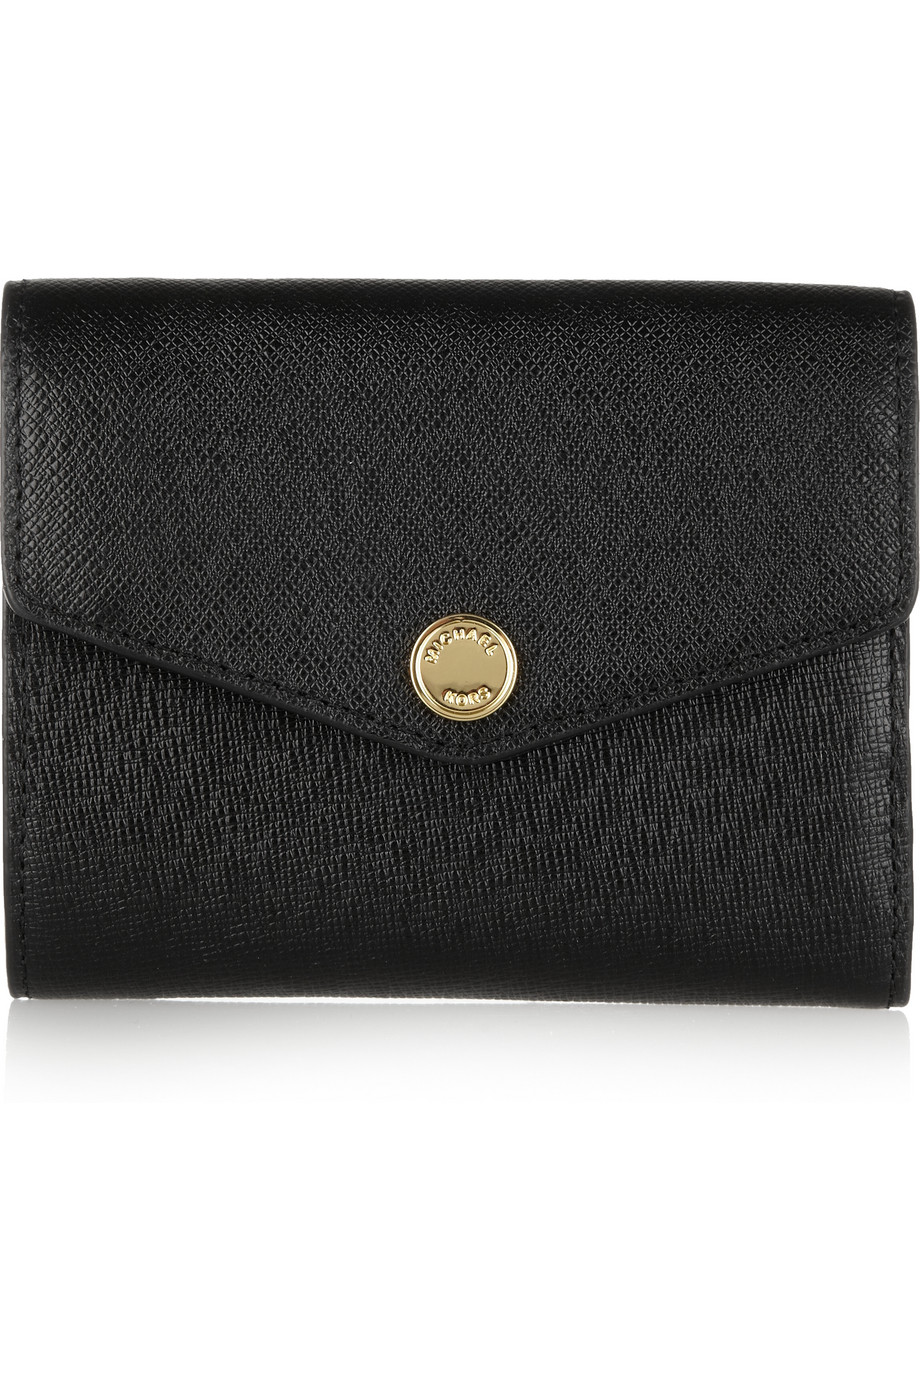 Michael By Michael Kors Small Colorblock Texturedleather Wallet in Black | Lyst